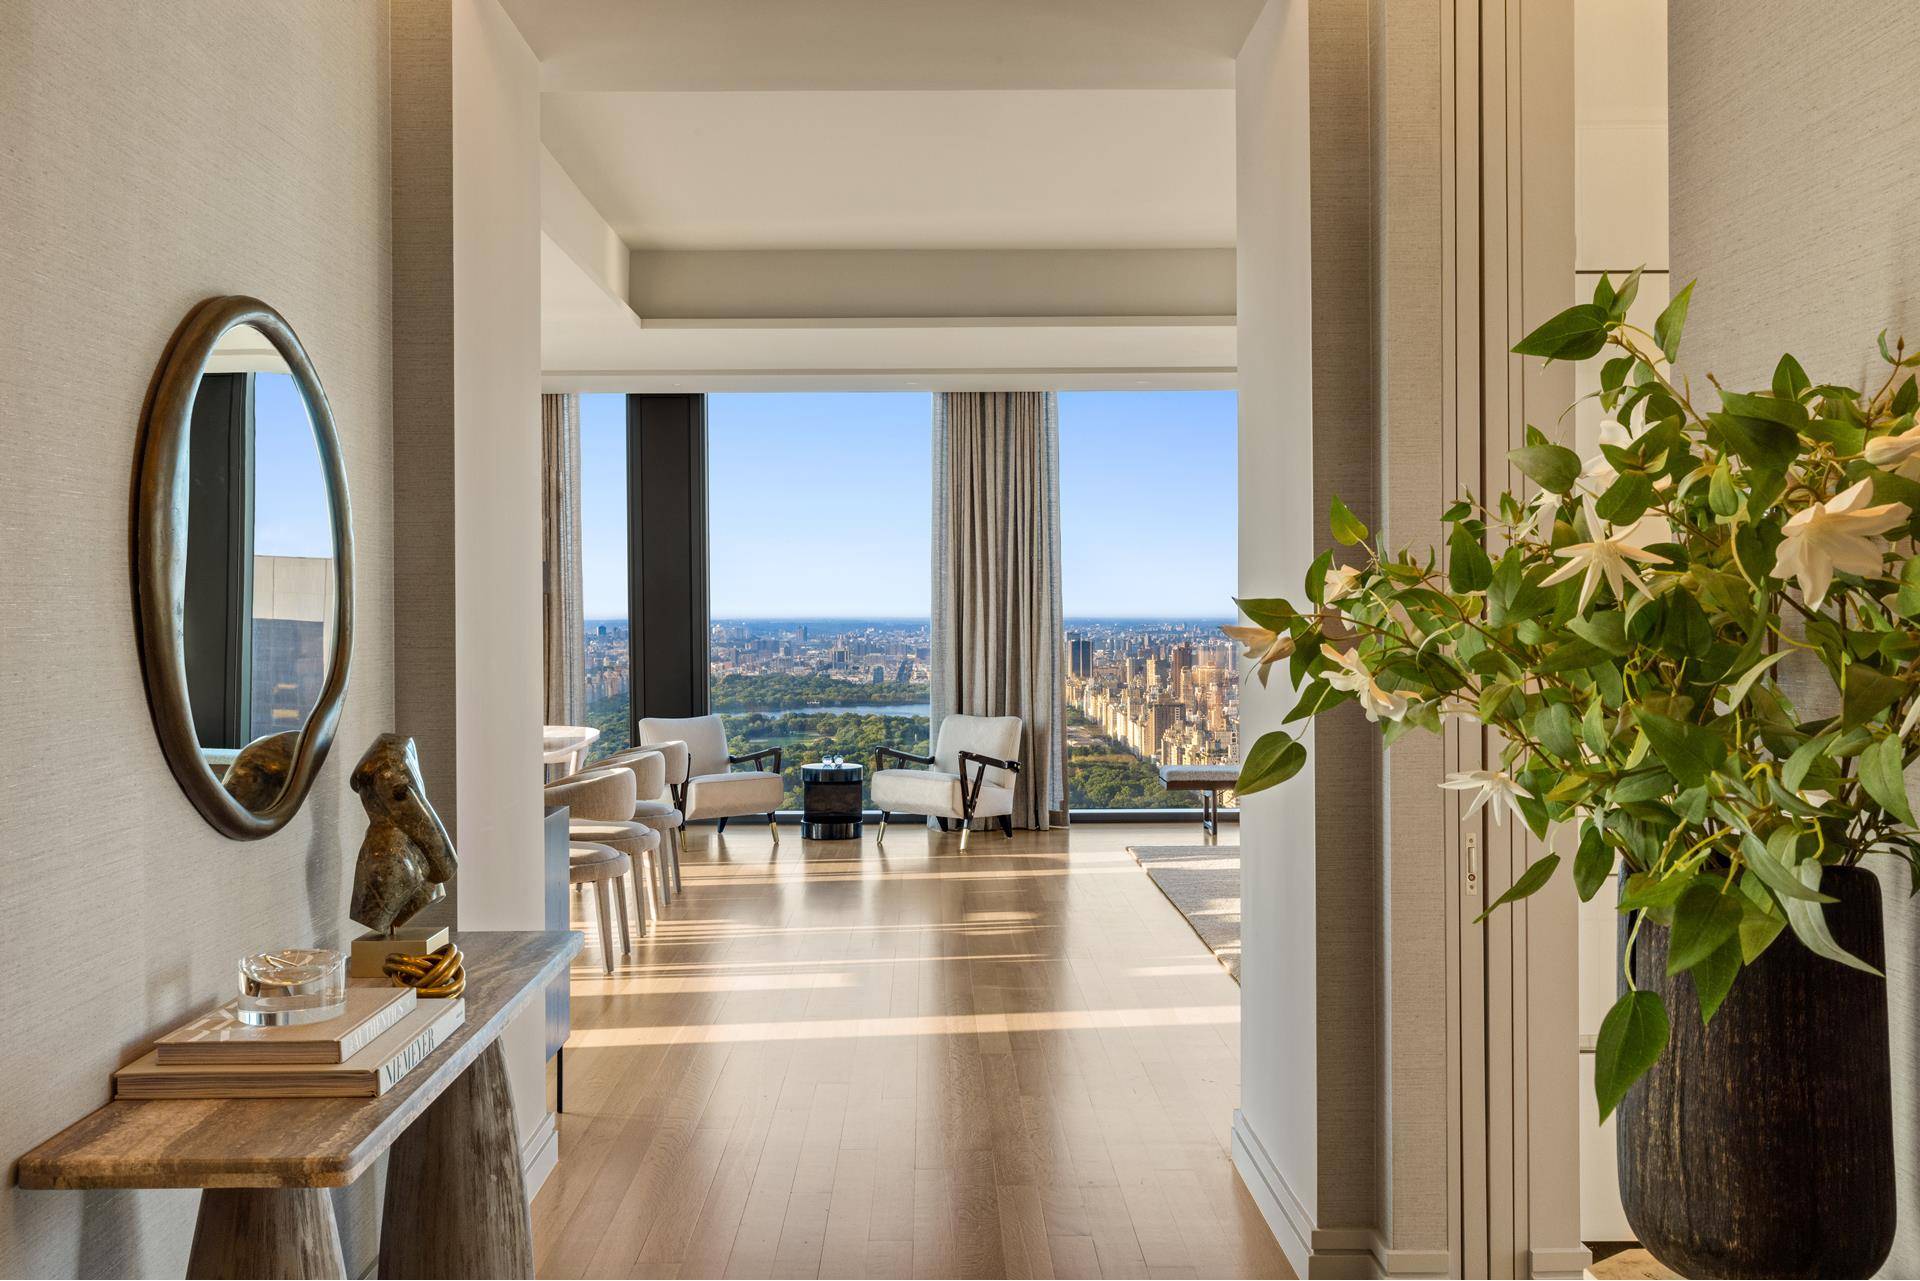 Combining superb sophistication and craftsmanship with the intimate feeling of home, Residence 57A at 53 West 53 comprises 3, 803 square feet, offering three bedrooms and a windowed study, three ...